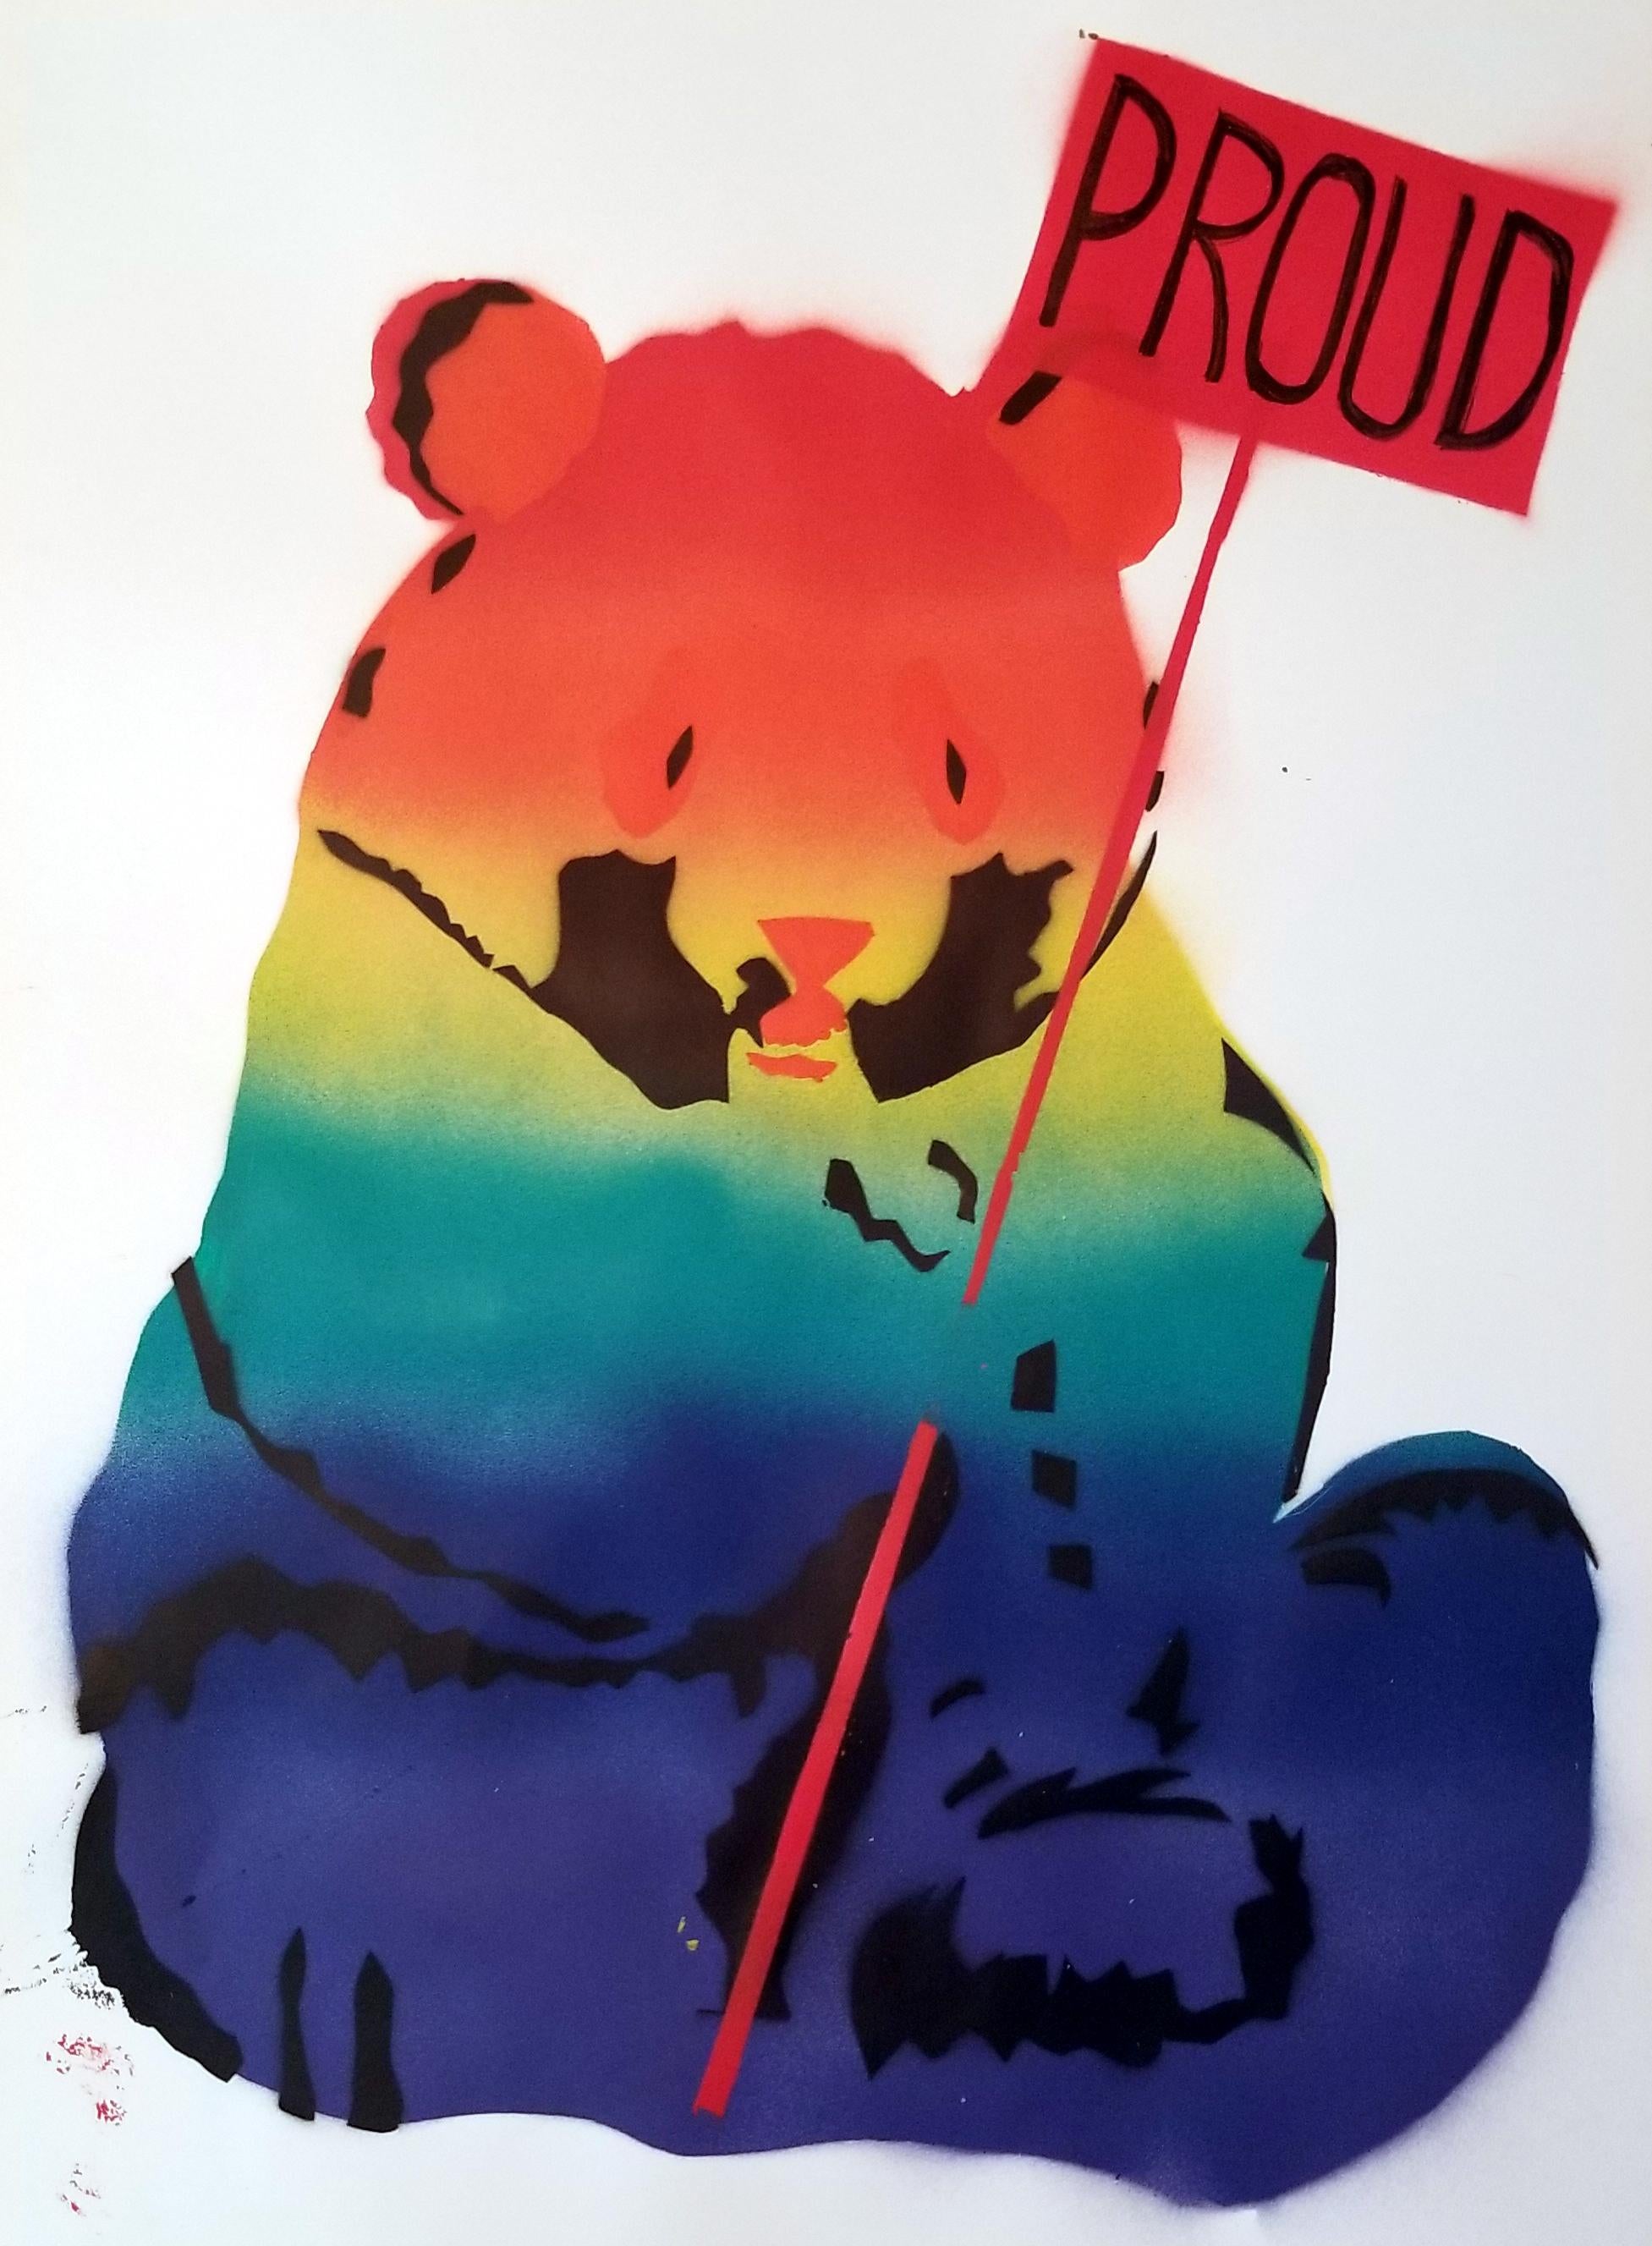 Panda rainbow SAVE THE HUMANS - Painting by K.K.